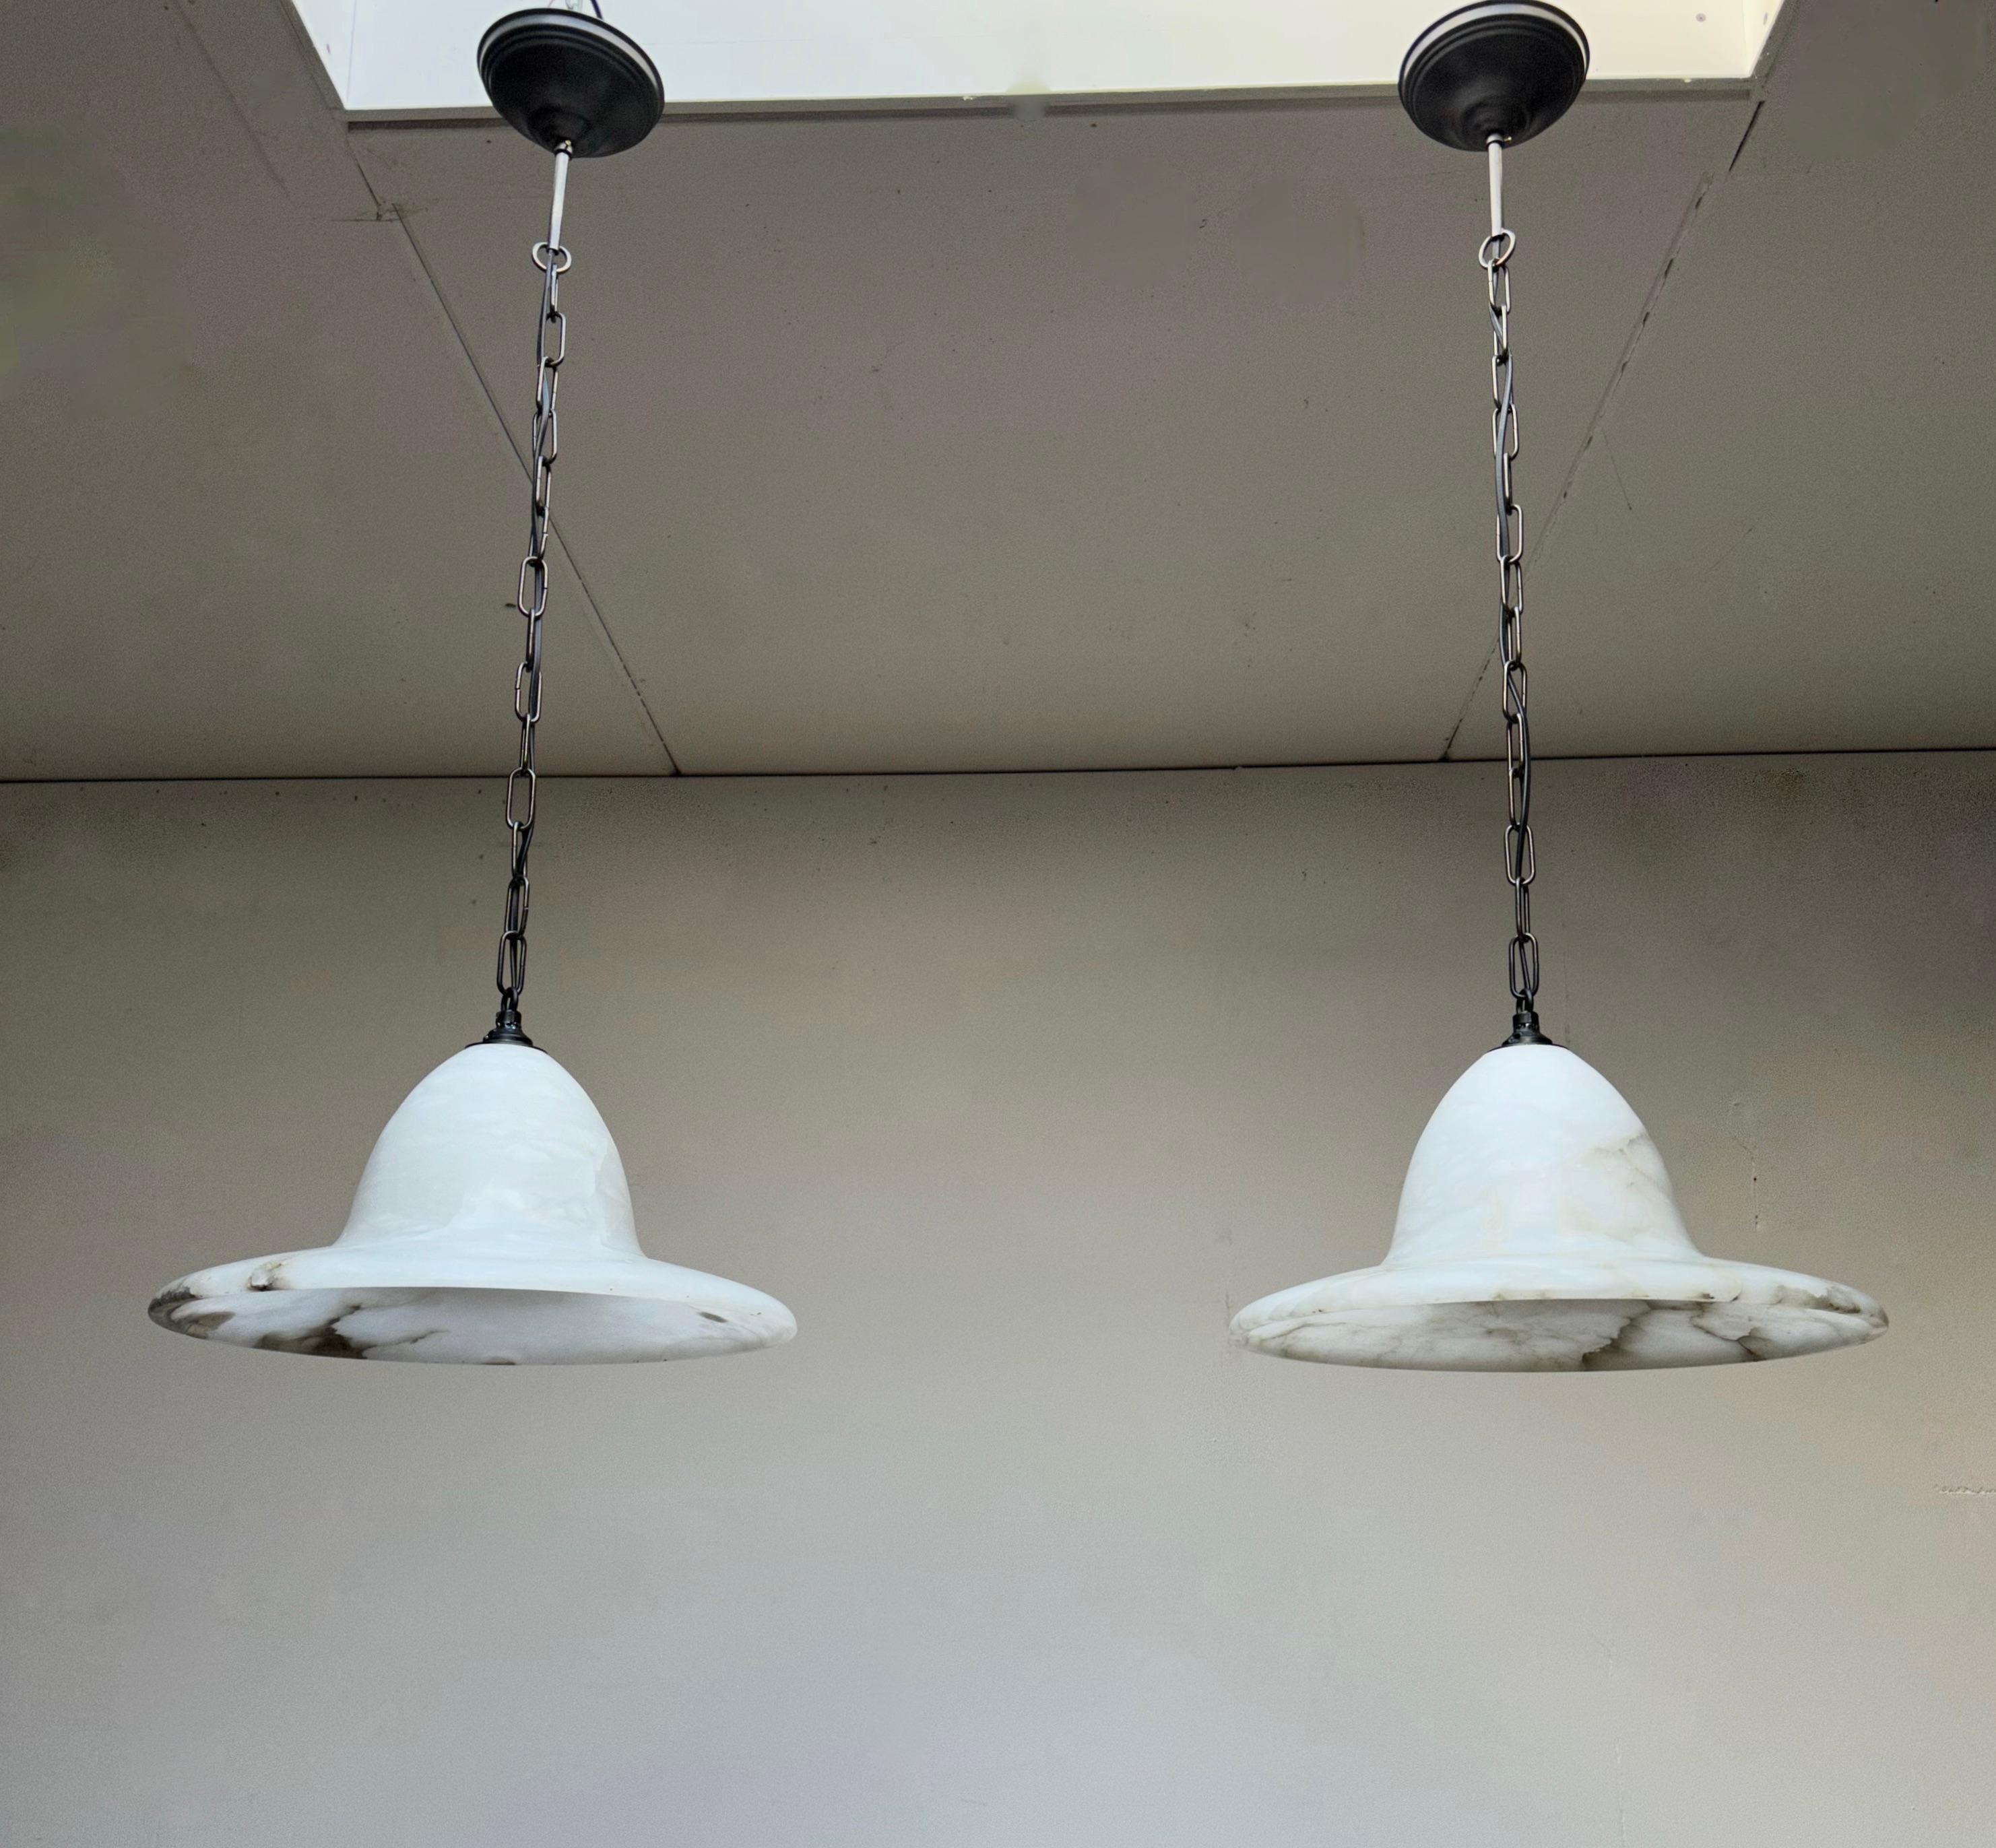 Rare set of hand carved, early 1900s alabaster pendant lights.

If you have been looking for the ideal pair of good size and stylish alabaster chandeliers for a project or for your own home then look no further. Via one of our connections we were